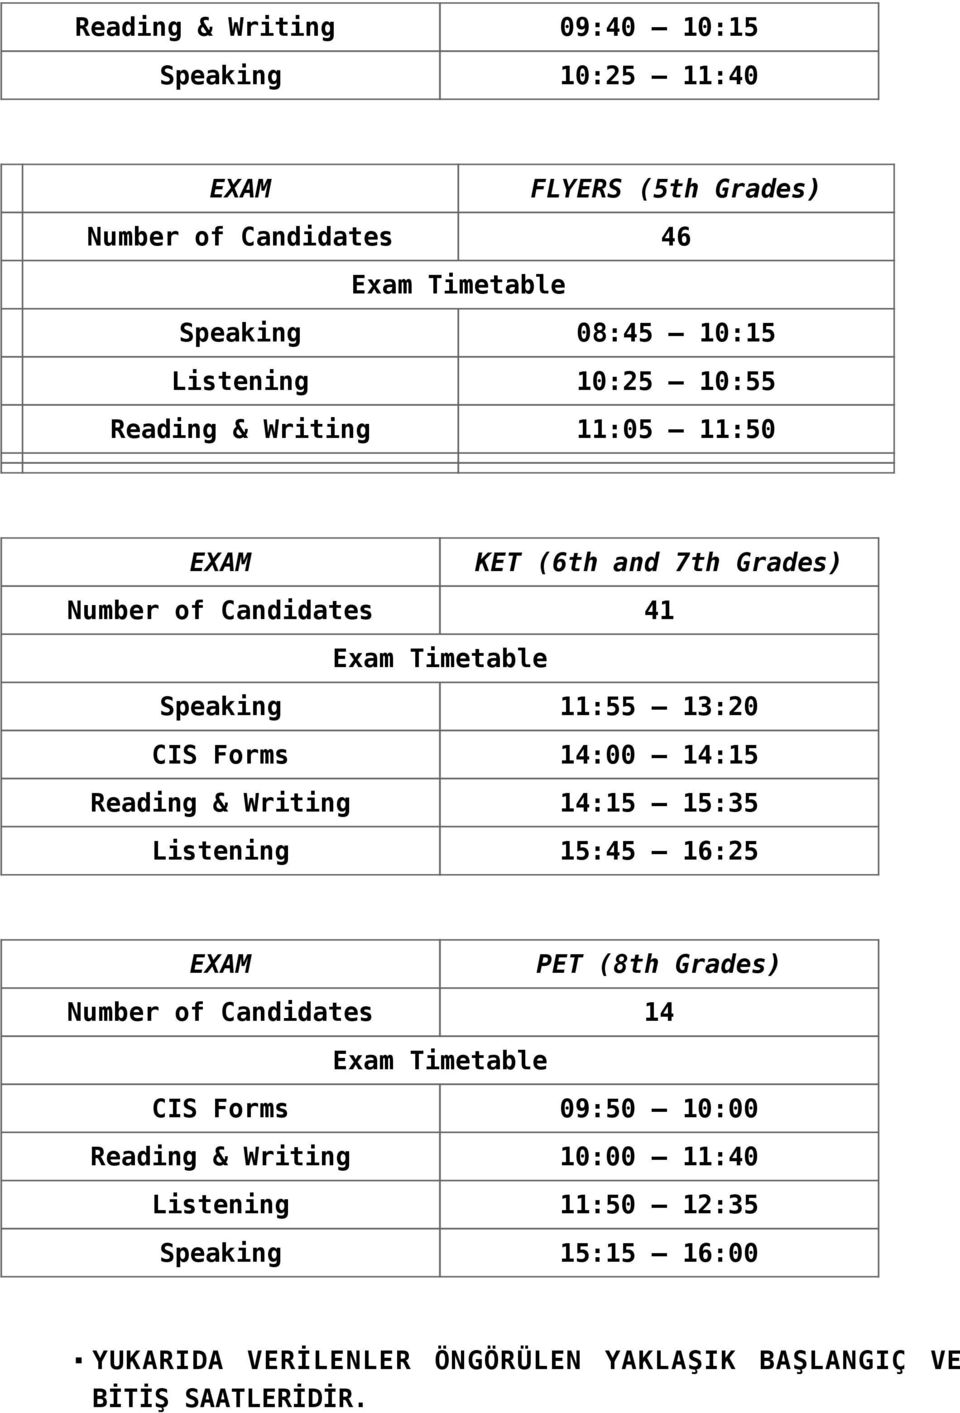 CIS Forms 14:00 14:15 Reading & Writing 14:15 15:35 Listening 15:45 16:25 EXAM PET (8th Grades) Number of Candidates 14 Exam Timetable CIS Forms